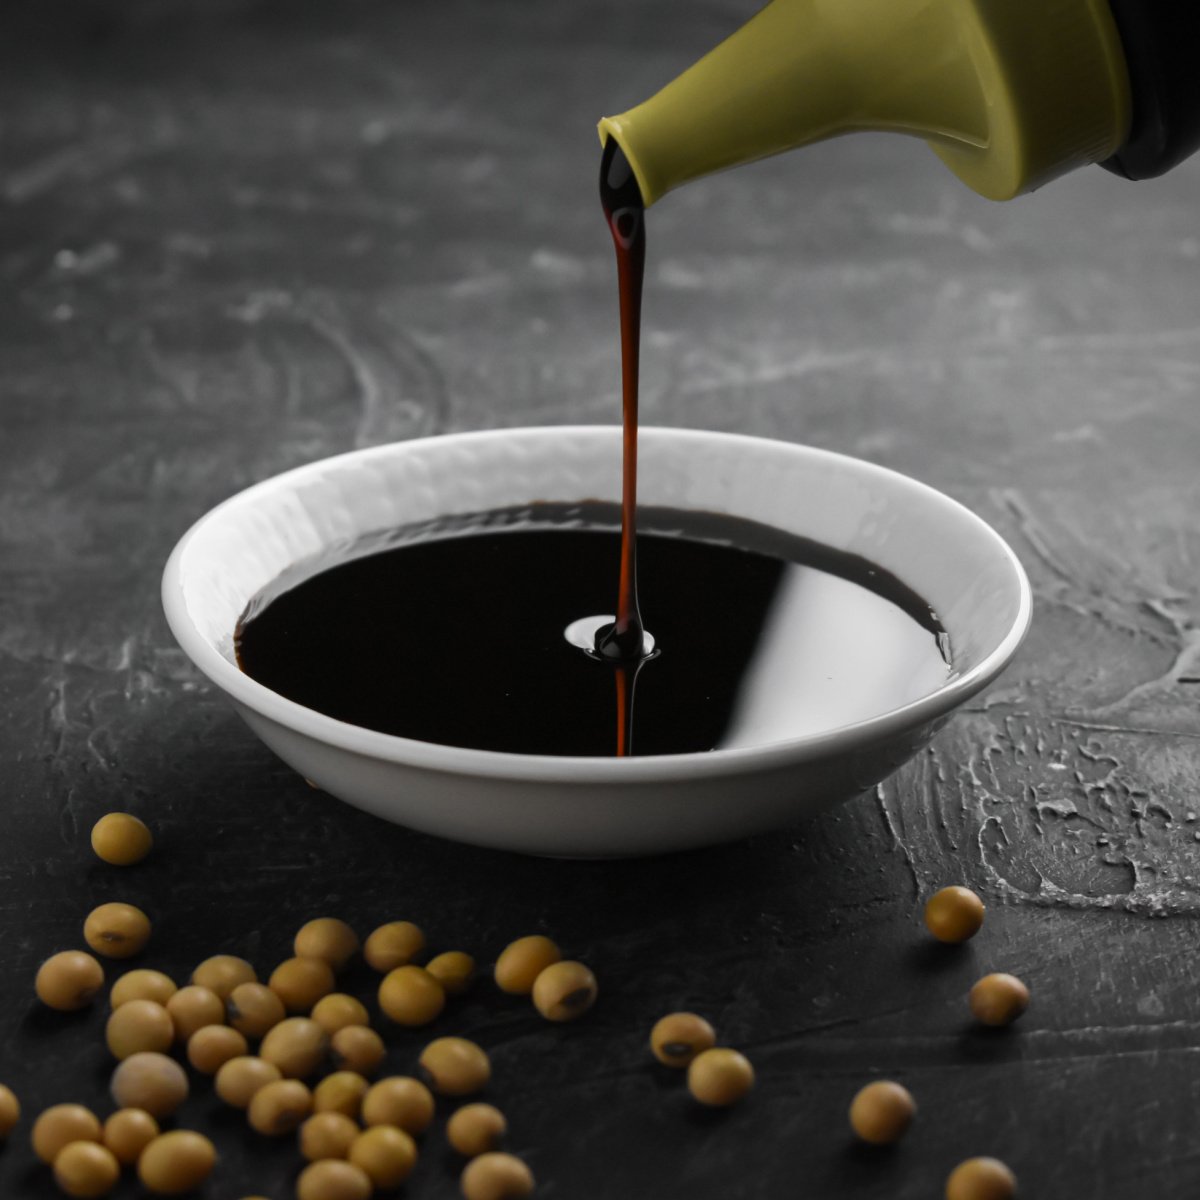 soy sauce poured into a bowl